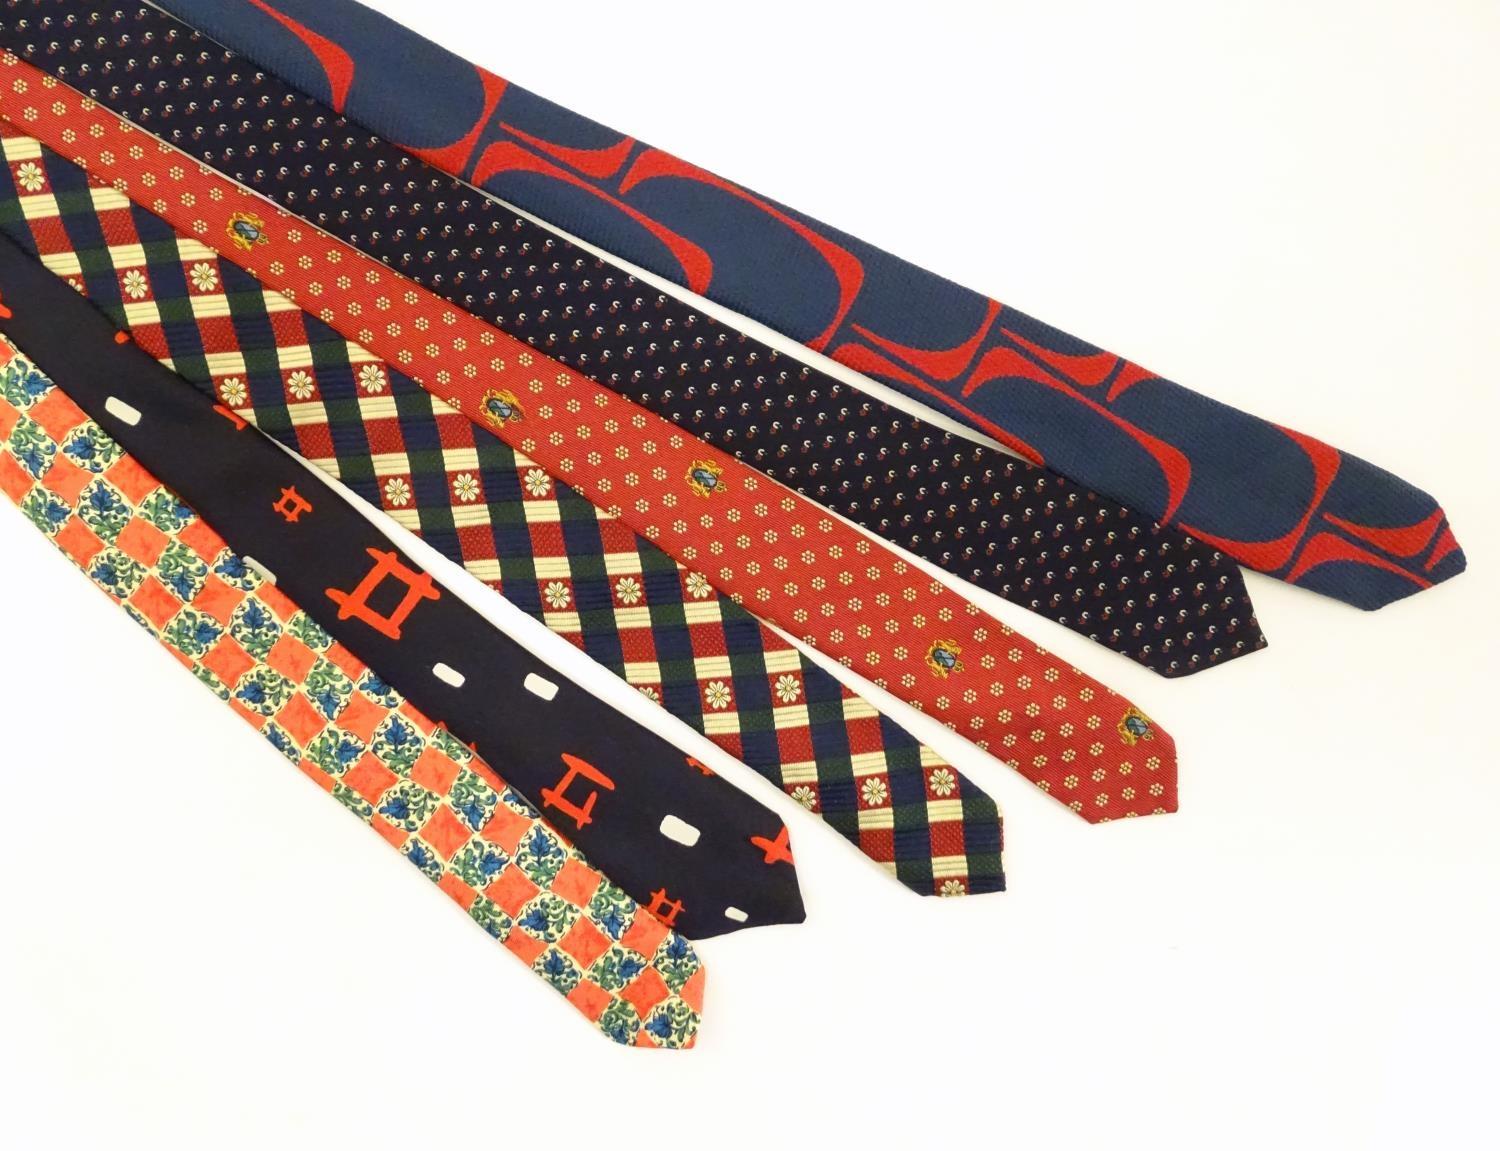 6 silk ties in navy and reds by Austin Reed, Tittorio, Pink and John Harmer (6) Please Note - we - Image 9 of 9